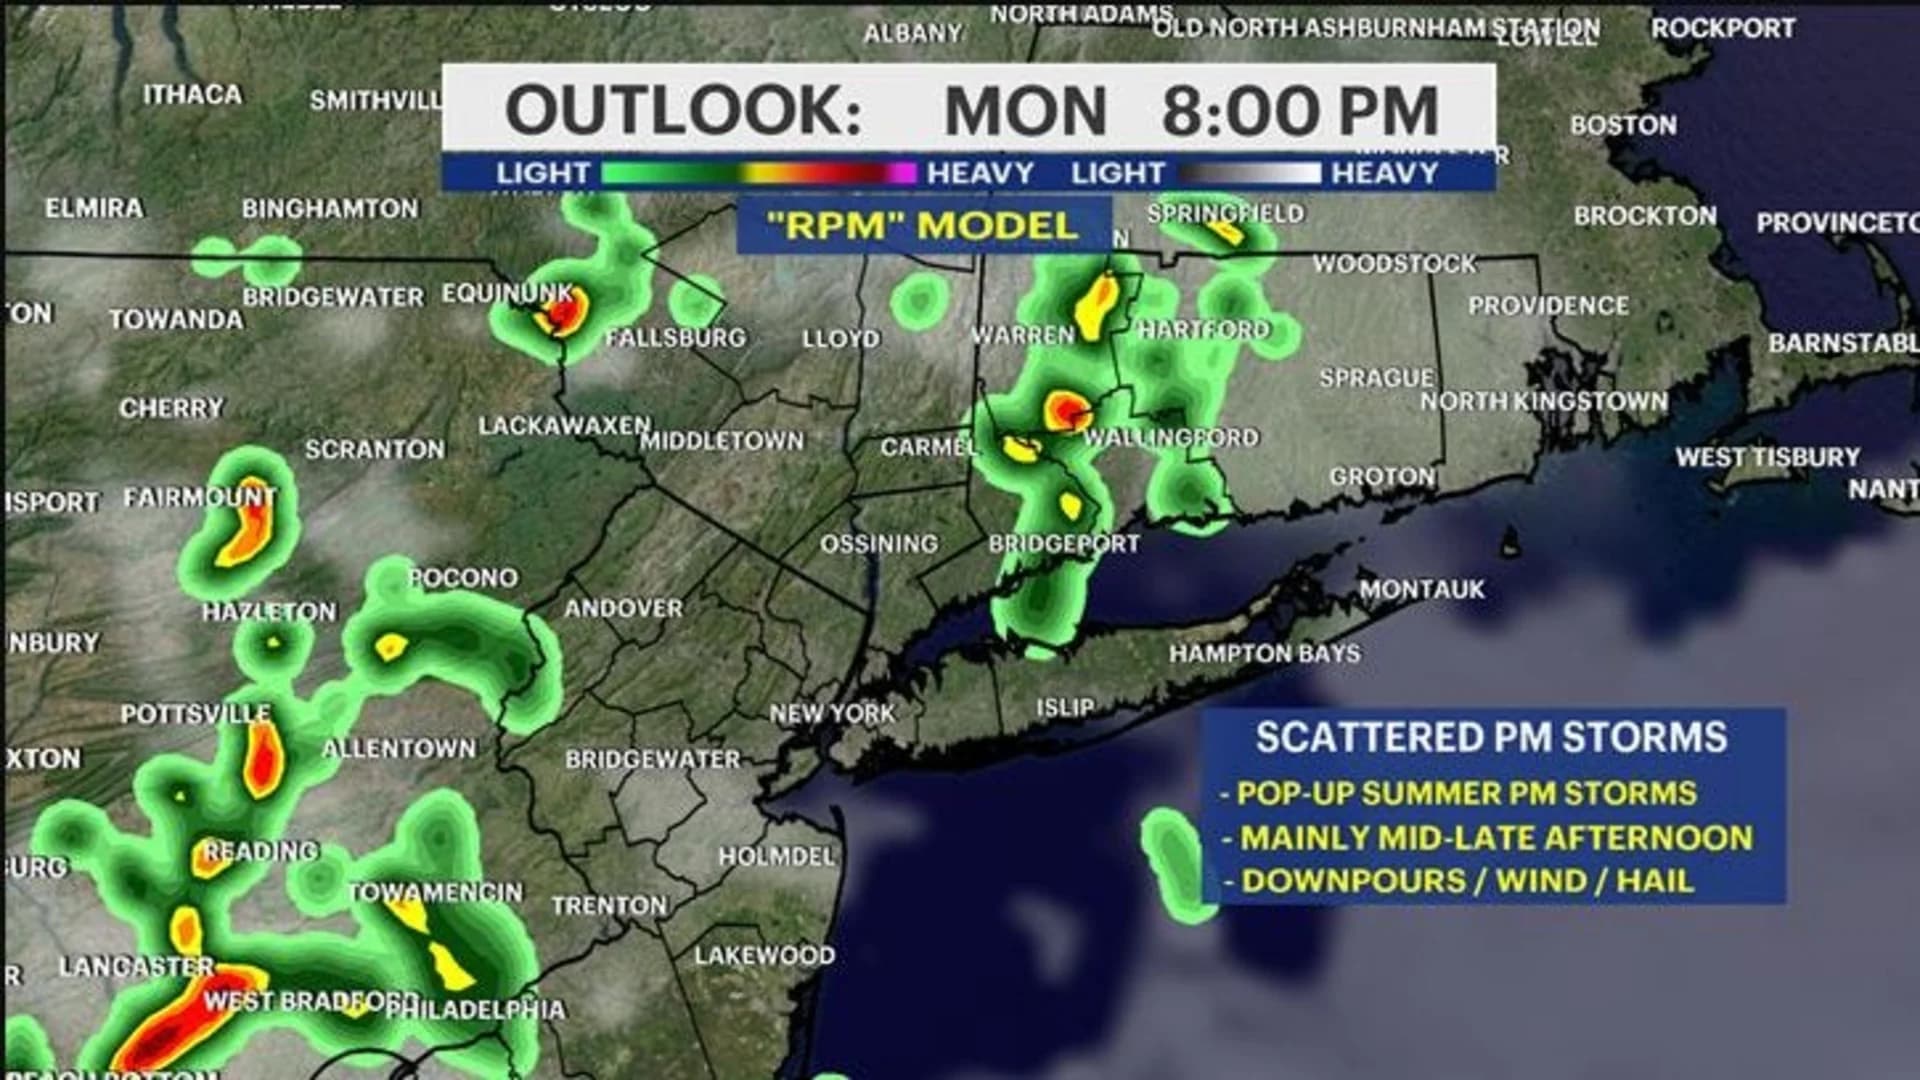 Scattered storms pose risk for parts of tri-state area